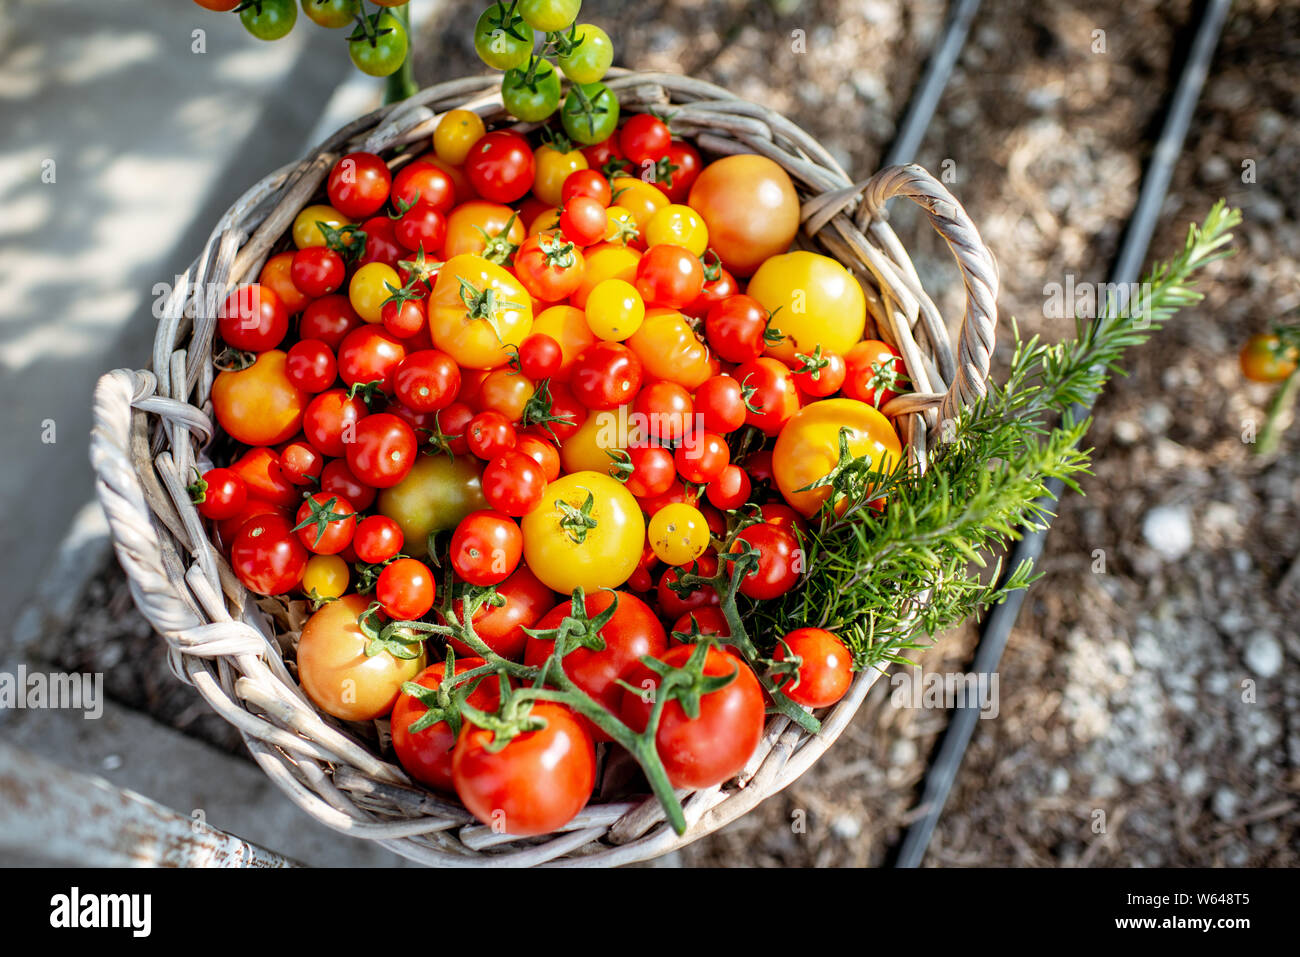 Rich harvest with lots of freshly plucked cherry tomatoes on the organic farm Stock Photo